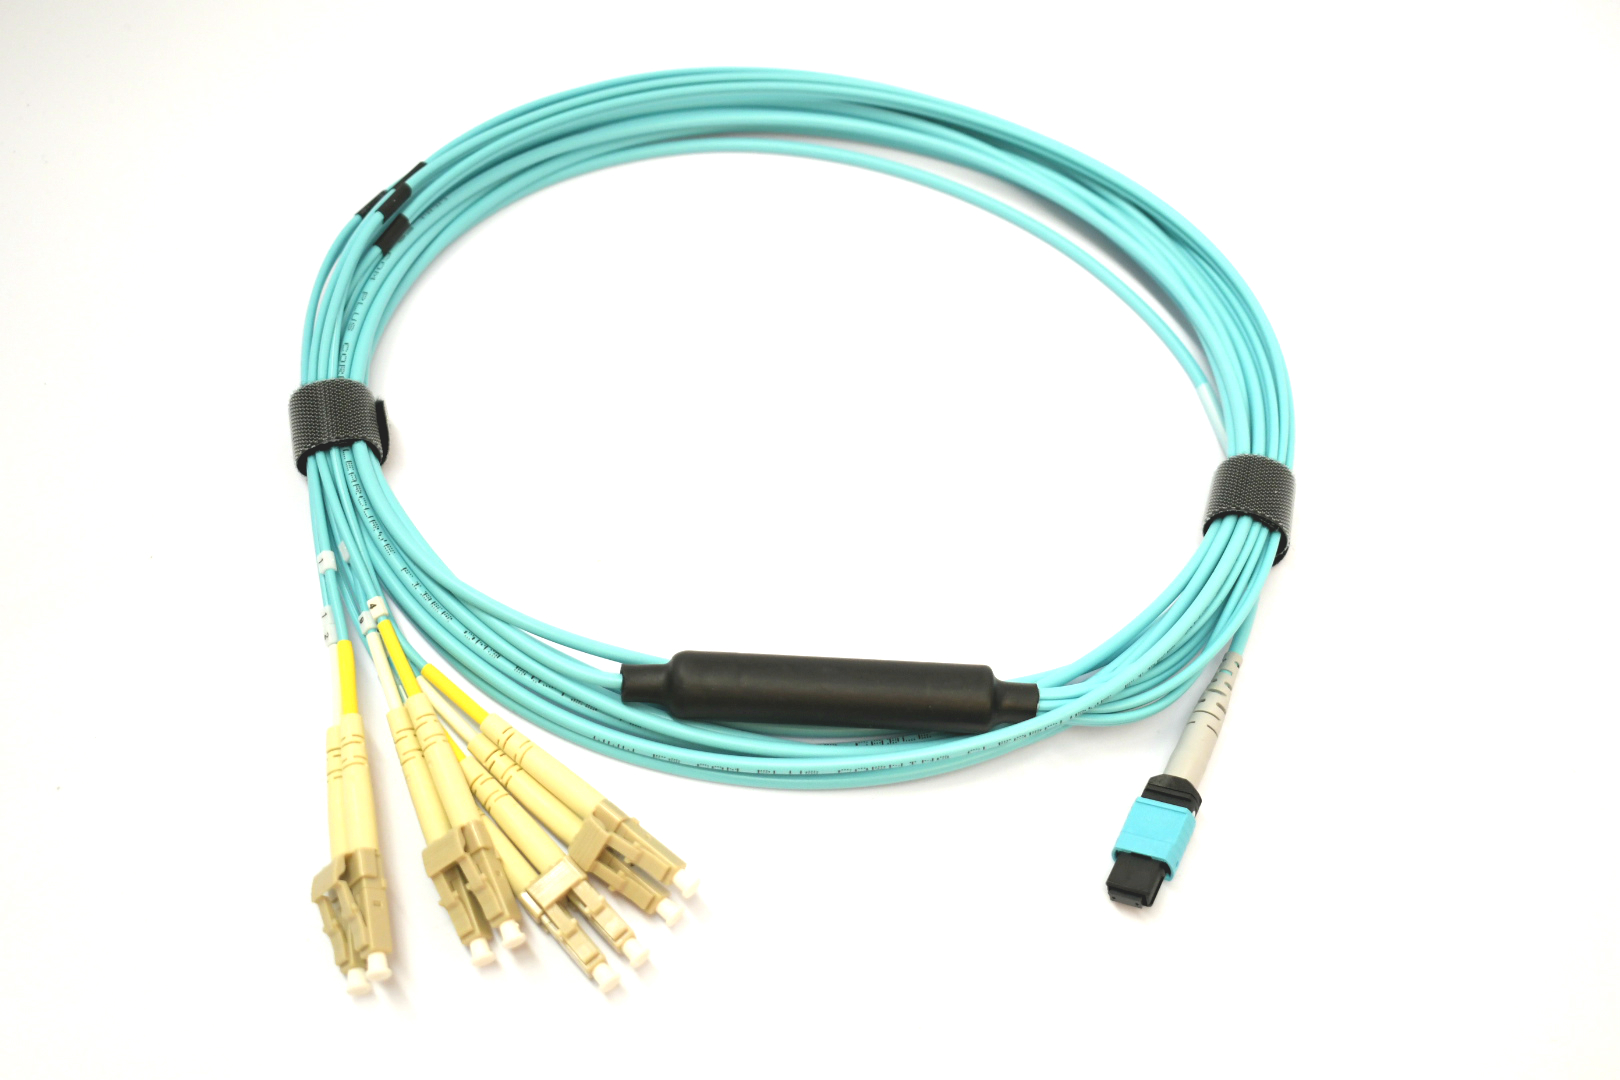 MTP/MPO OM3 FAN-OUT CABLES